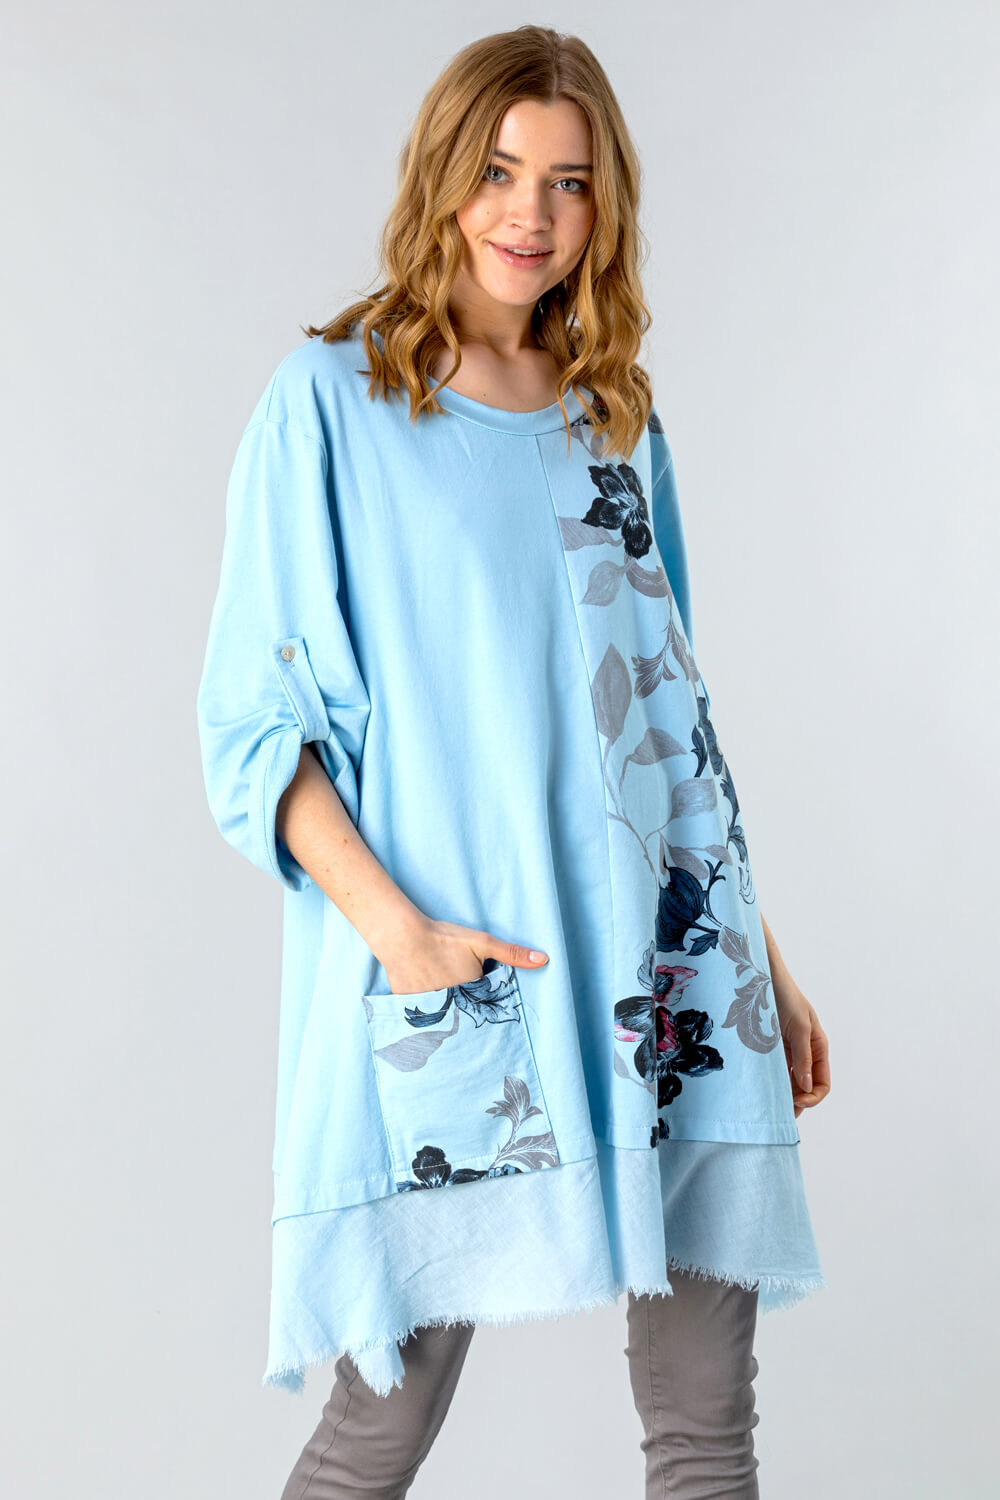 Floral Slouchy Pocket Tunic Top in Light Blue - Roman Originals UK